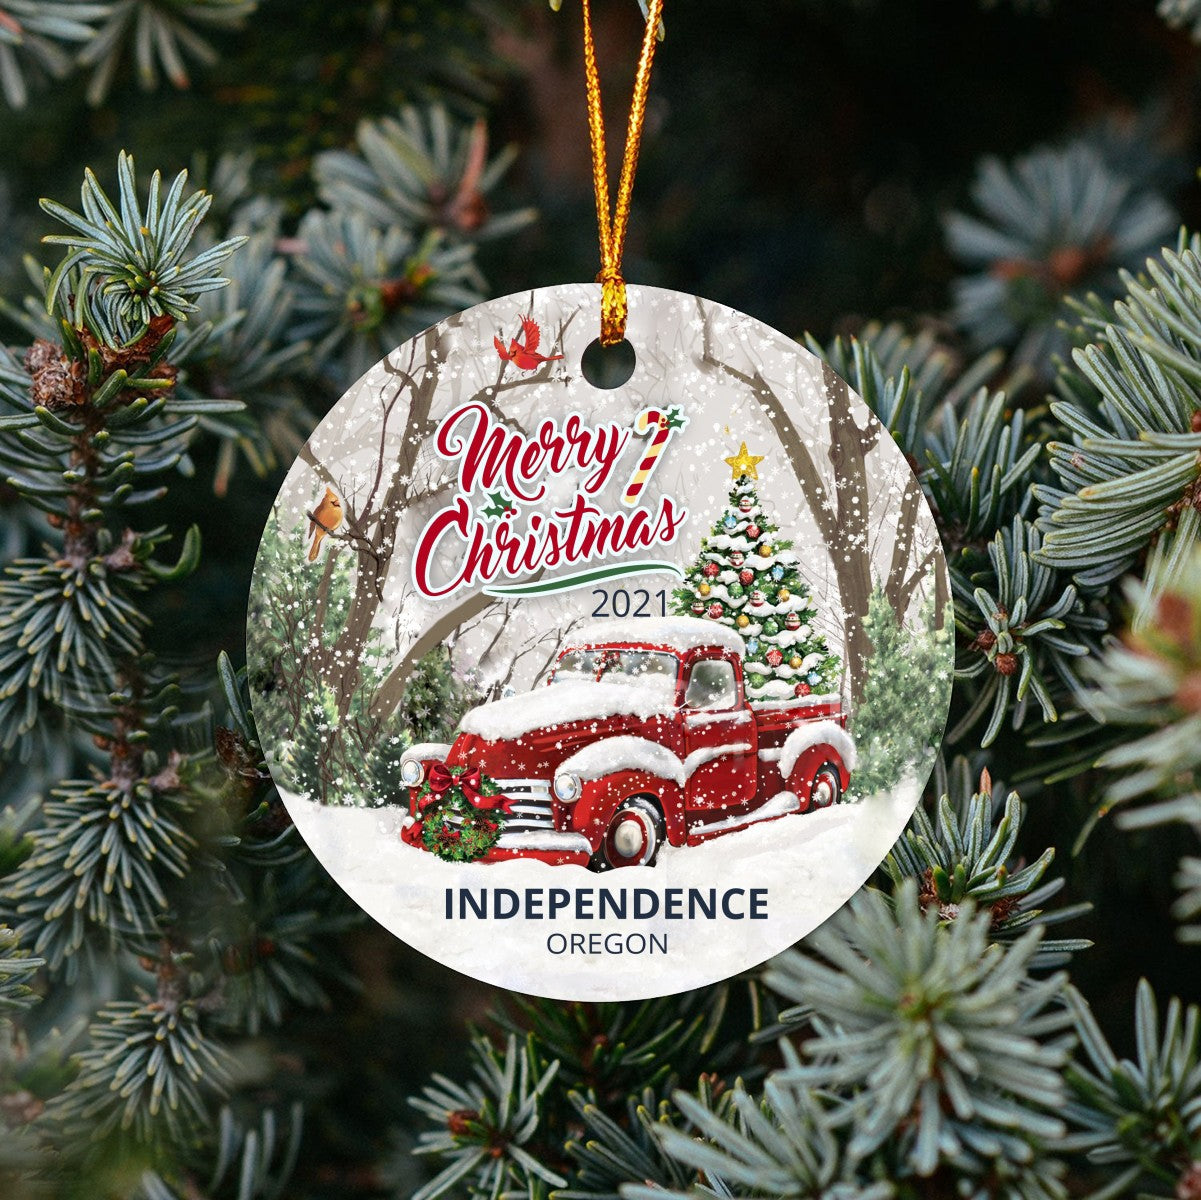 Christmas Tree Ornaments Independence - Ornament With Name City, State Independence Oregon OR Ornament - Red Truck Xmas Ornaments 3'' Plastic Gift For Family, Friend And Housewarming